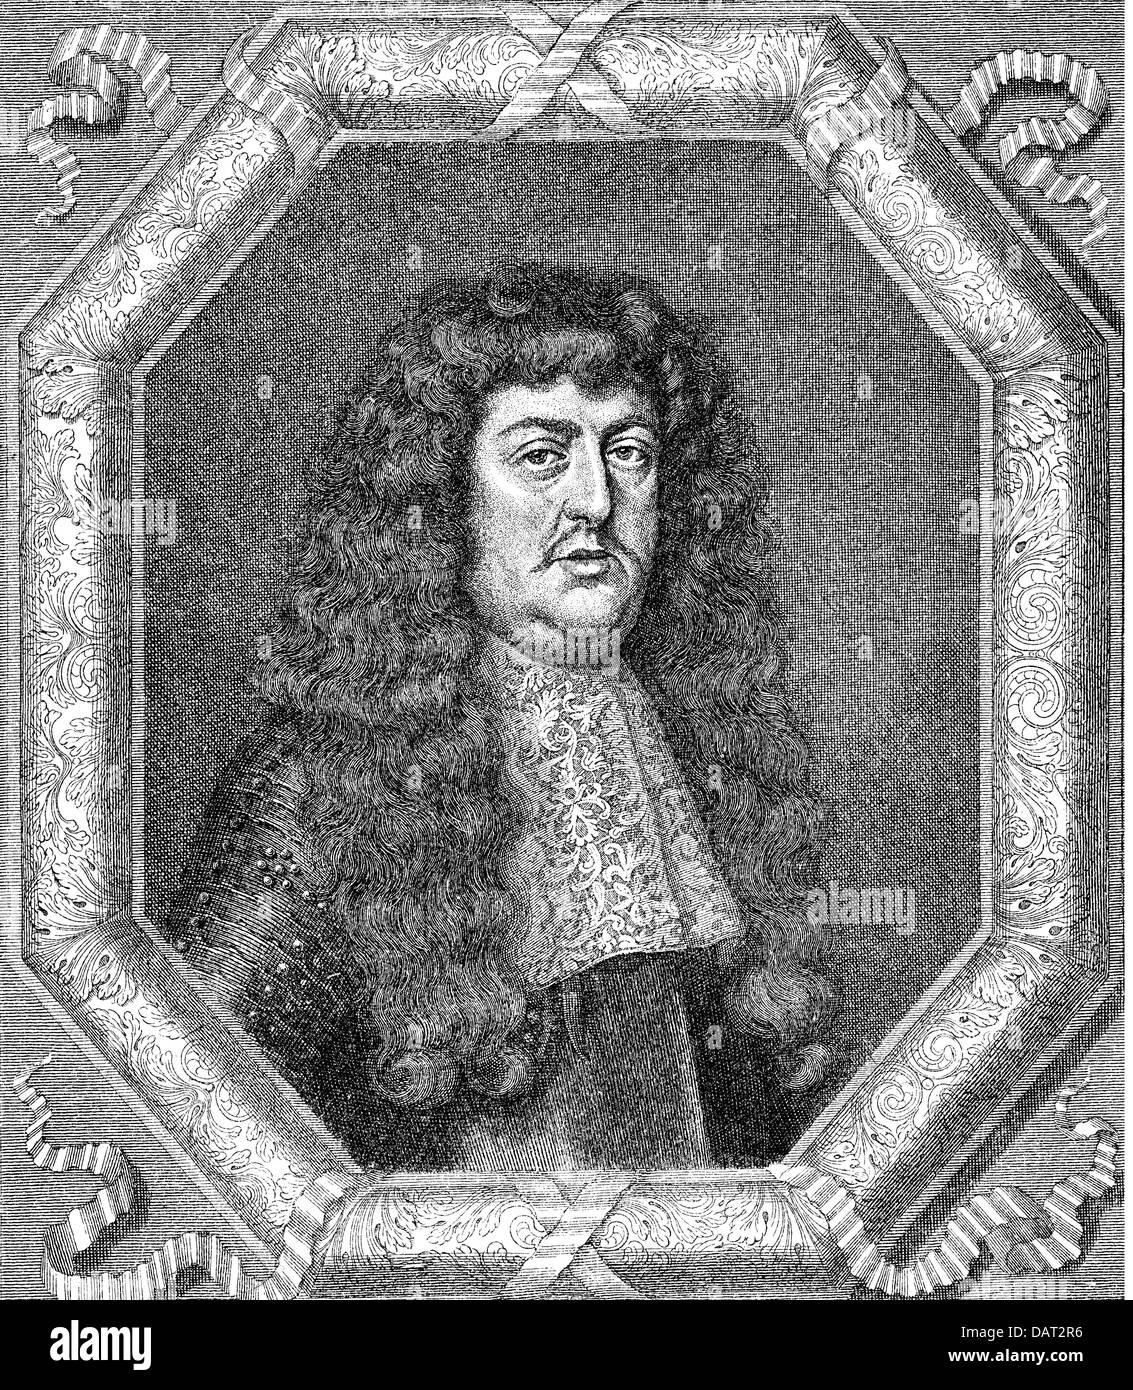 Ferdinand Maximilian, 23.9.1625 - 4.11.1669, margrave of Baden-Baden, portrait, copper engraving of Philipp Kilian, 2nd half 17th century, Artist's Copyright has not to be cleared Stock Photo